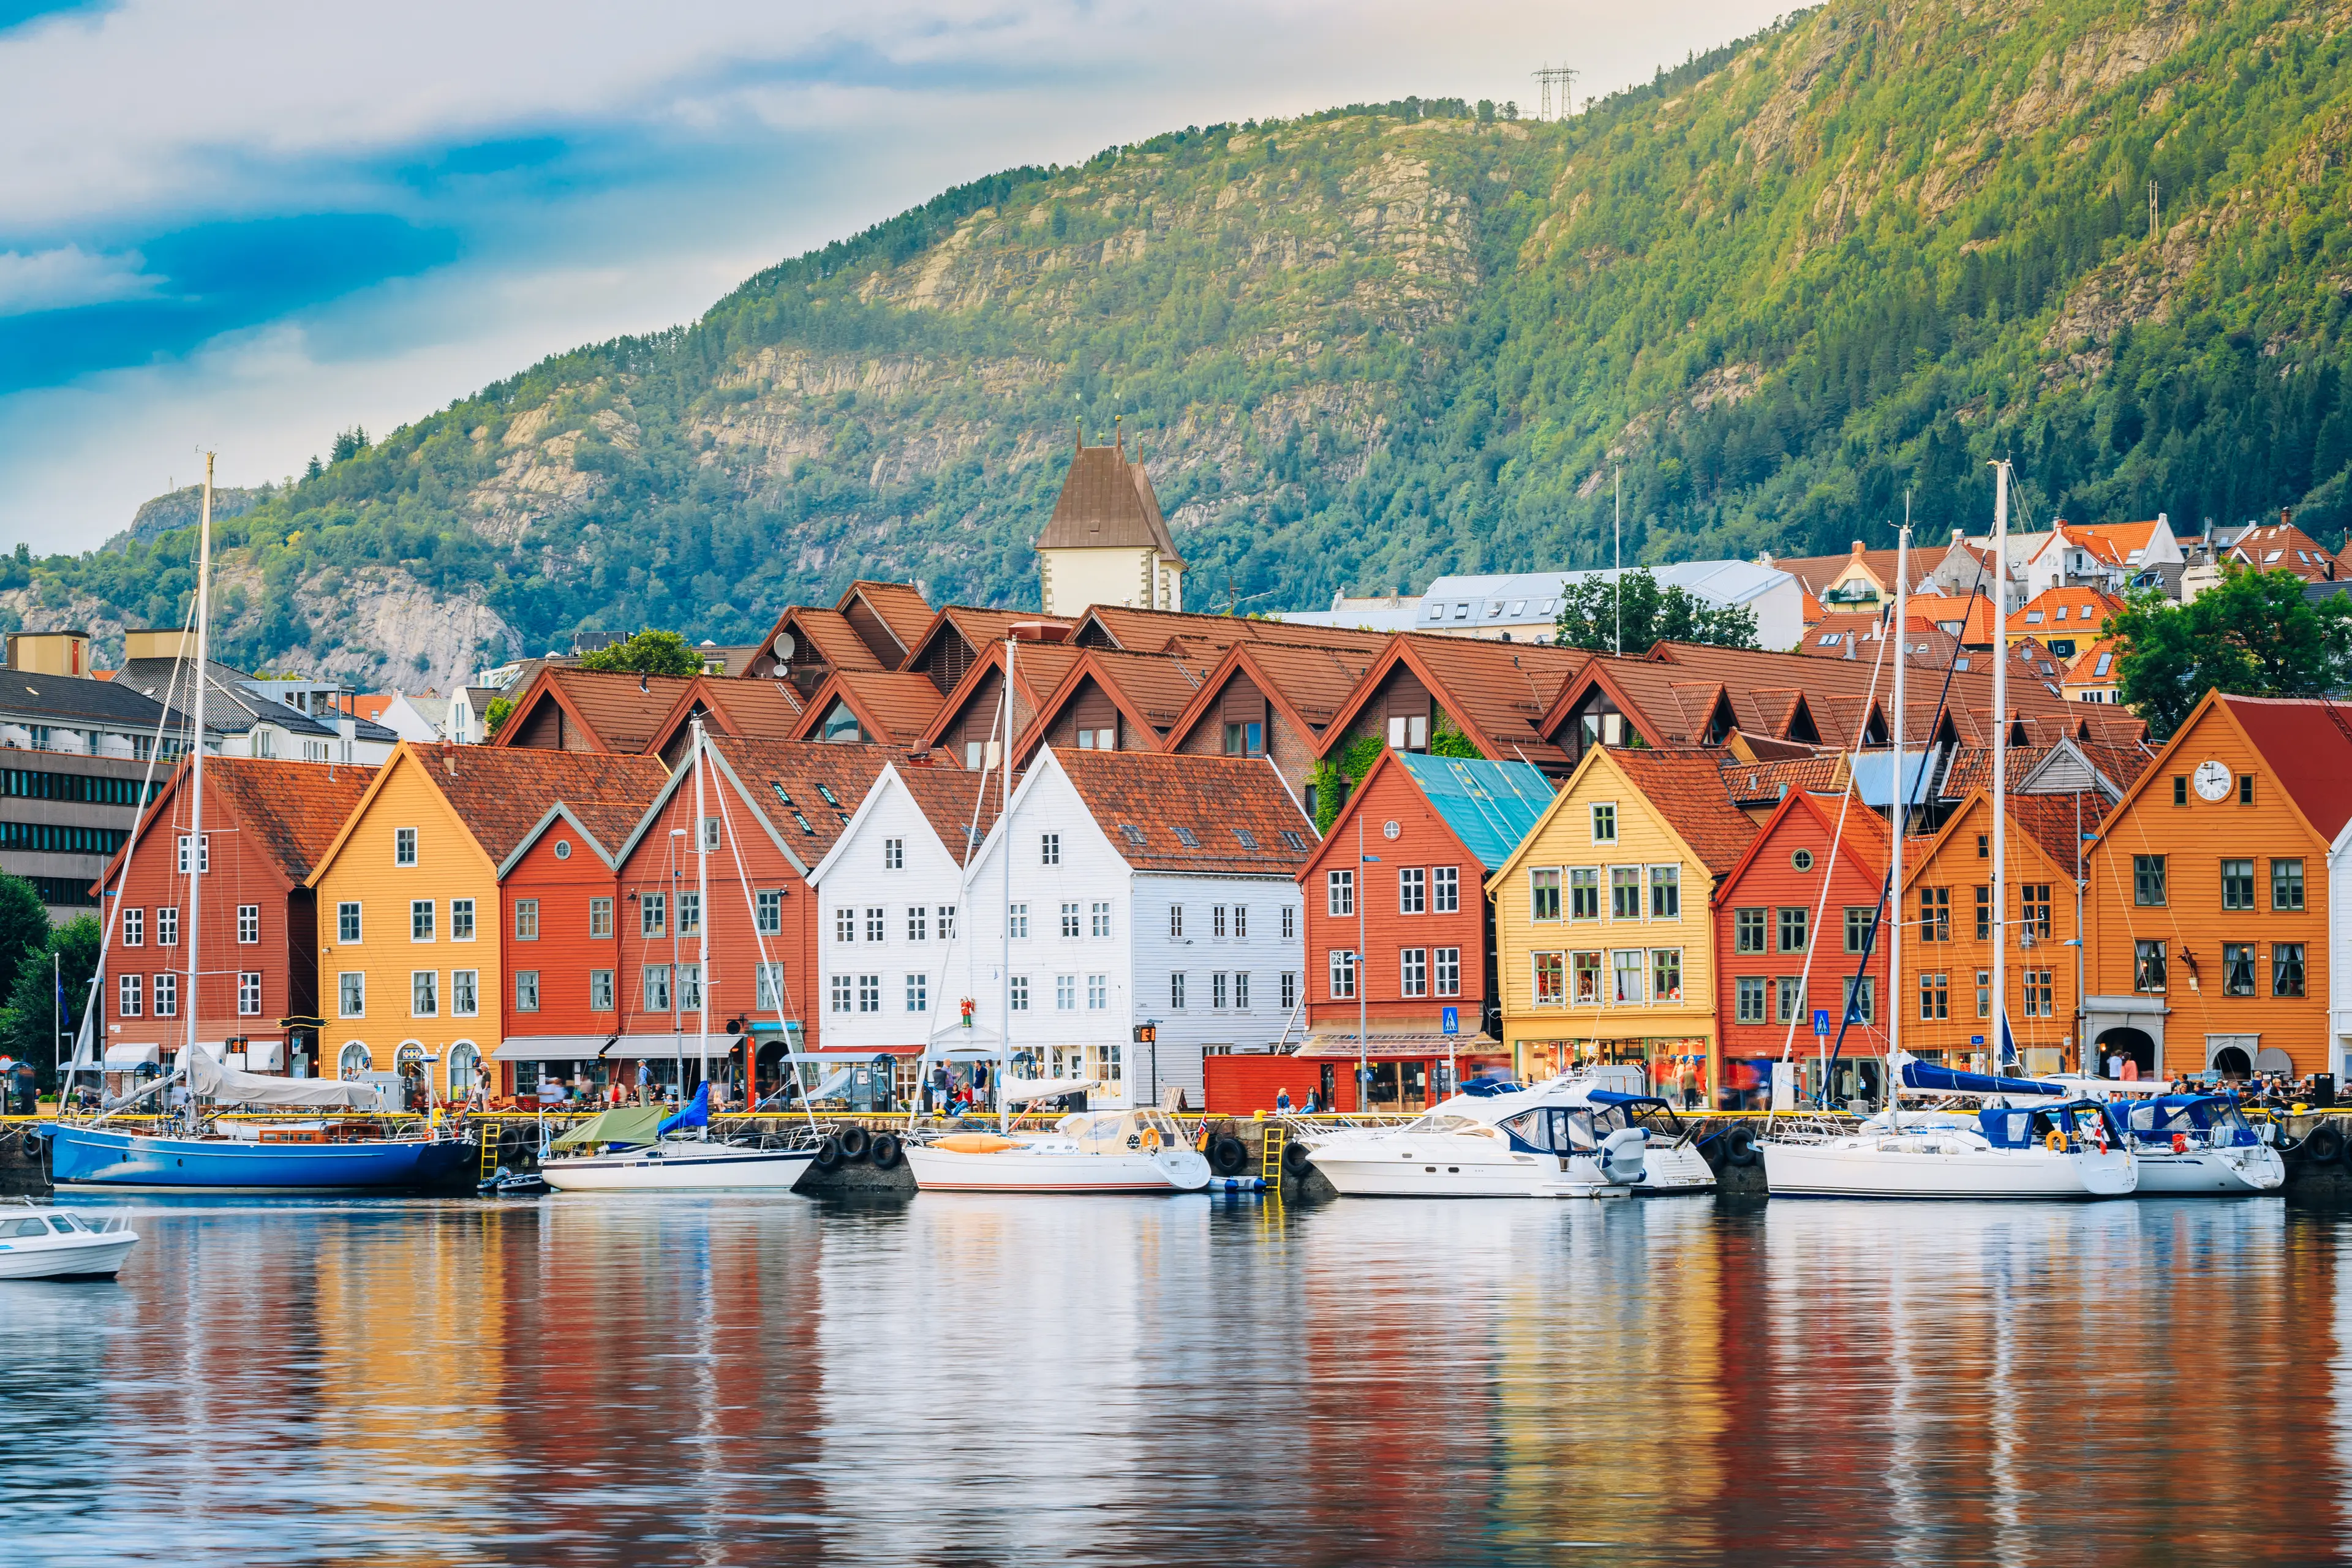 6-Day Solo Food, Wine, and Sightseeing Adventure in Norway